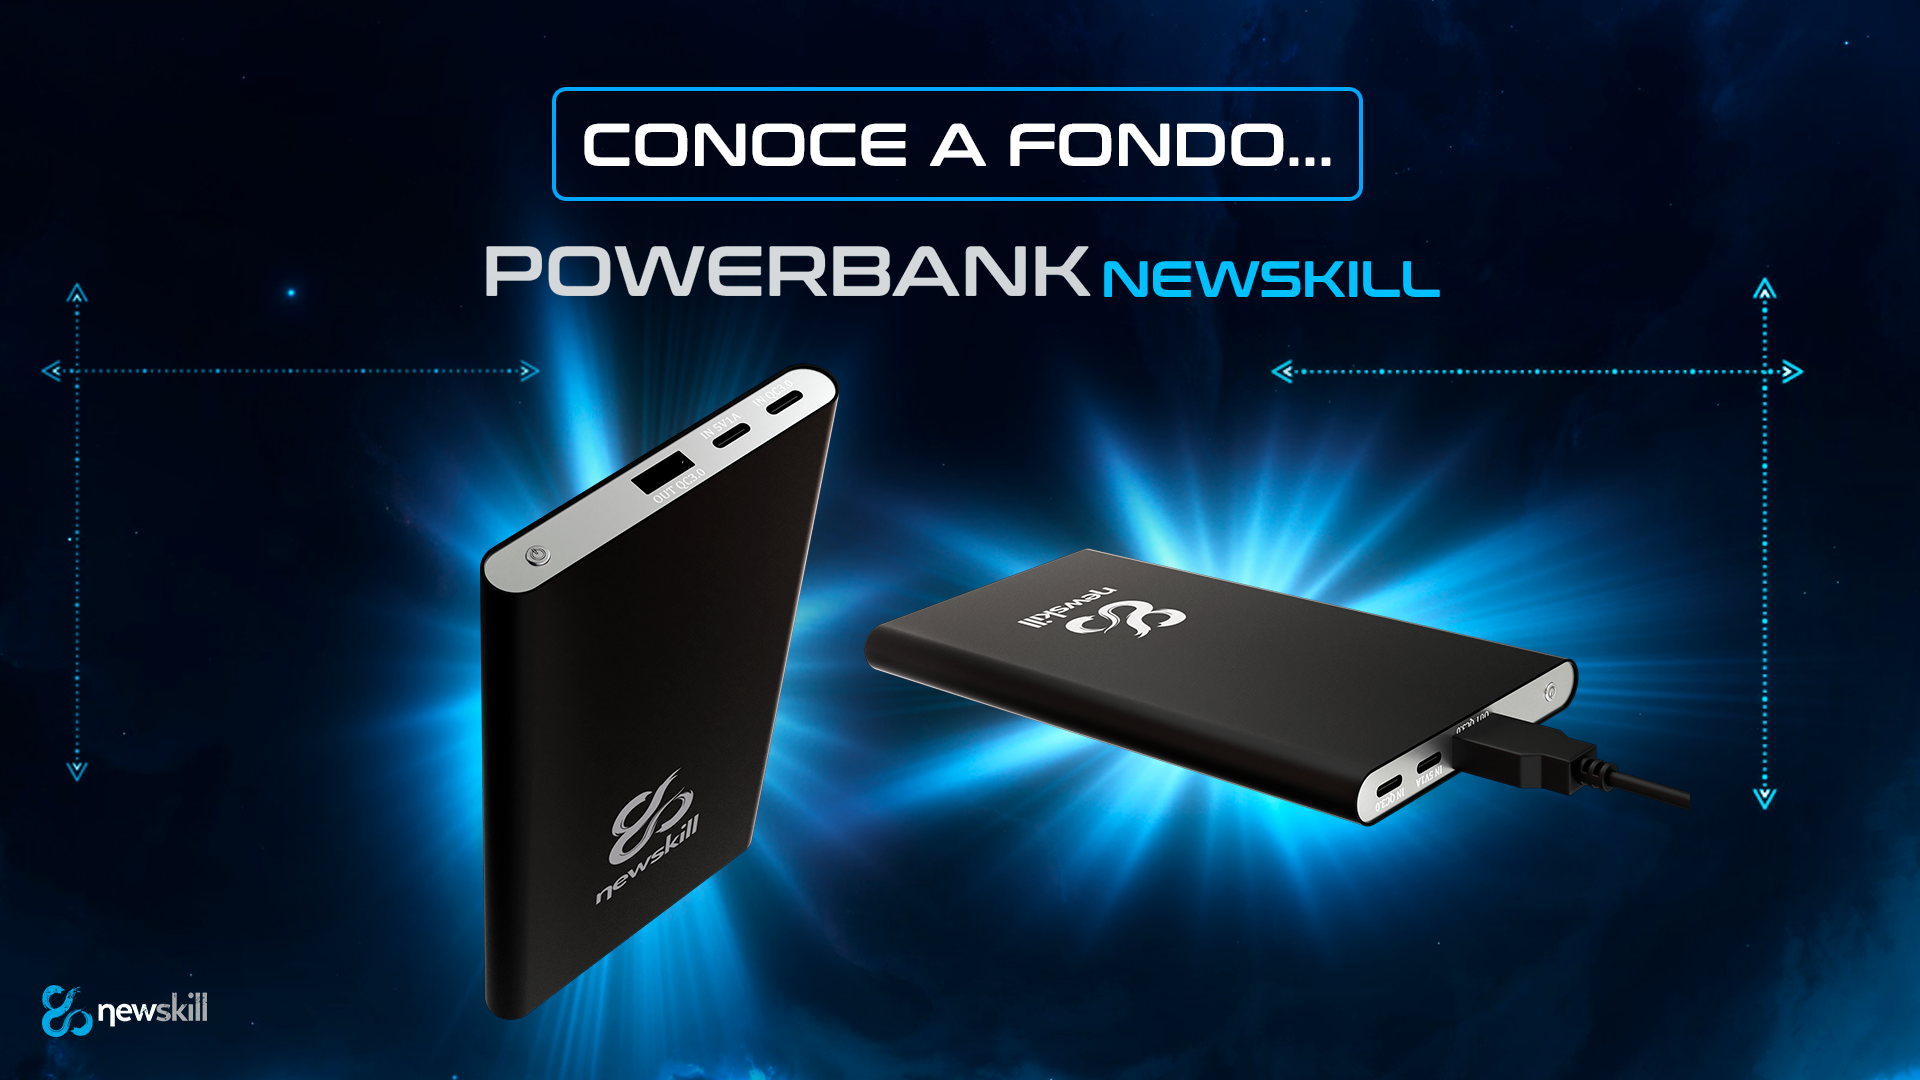 Learn more about the Newskill Powerbank